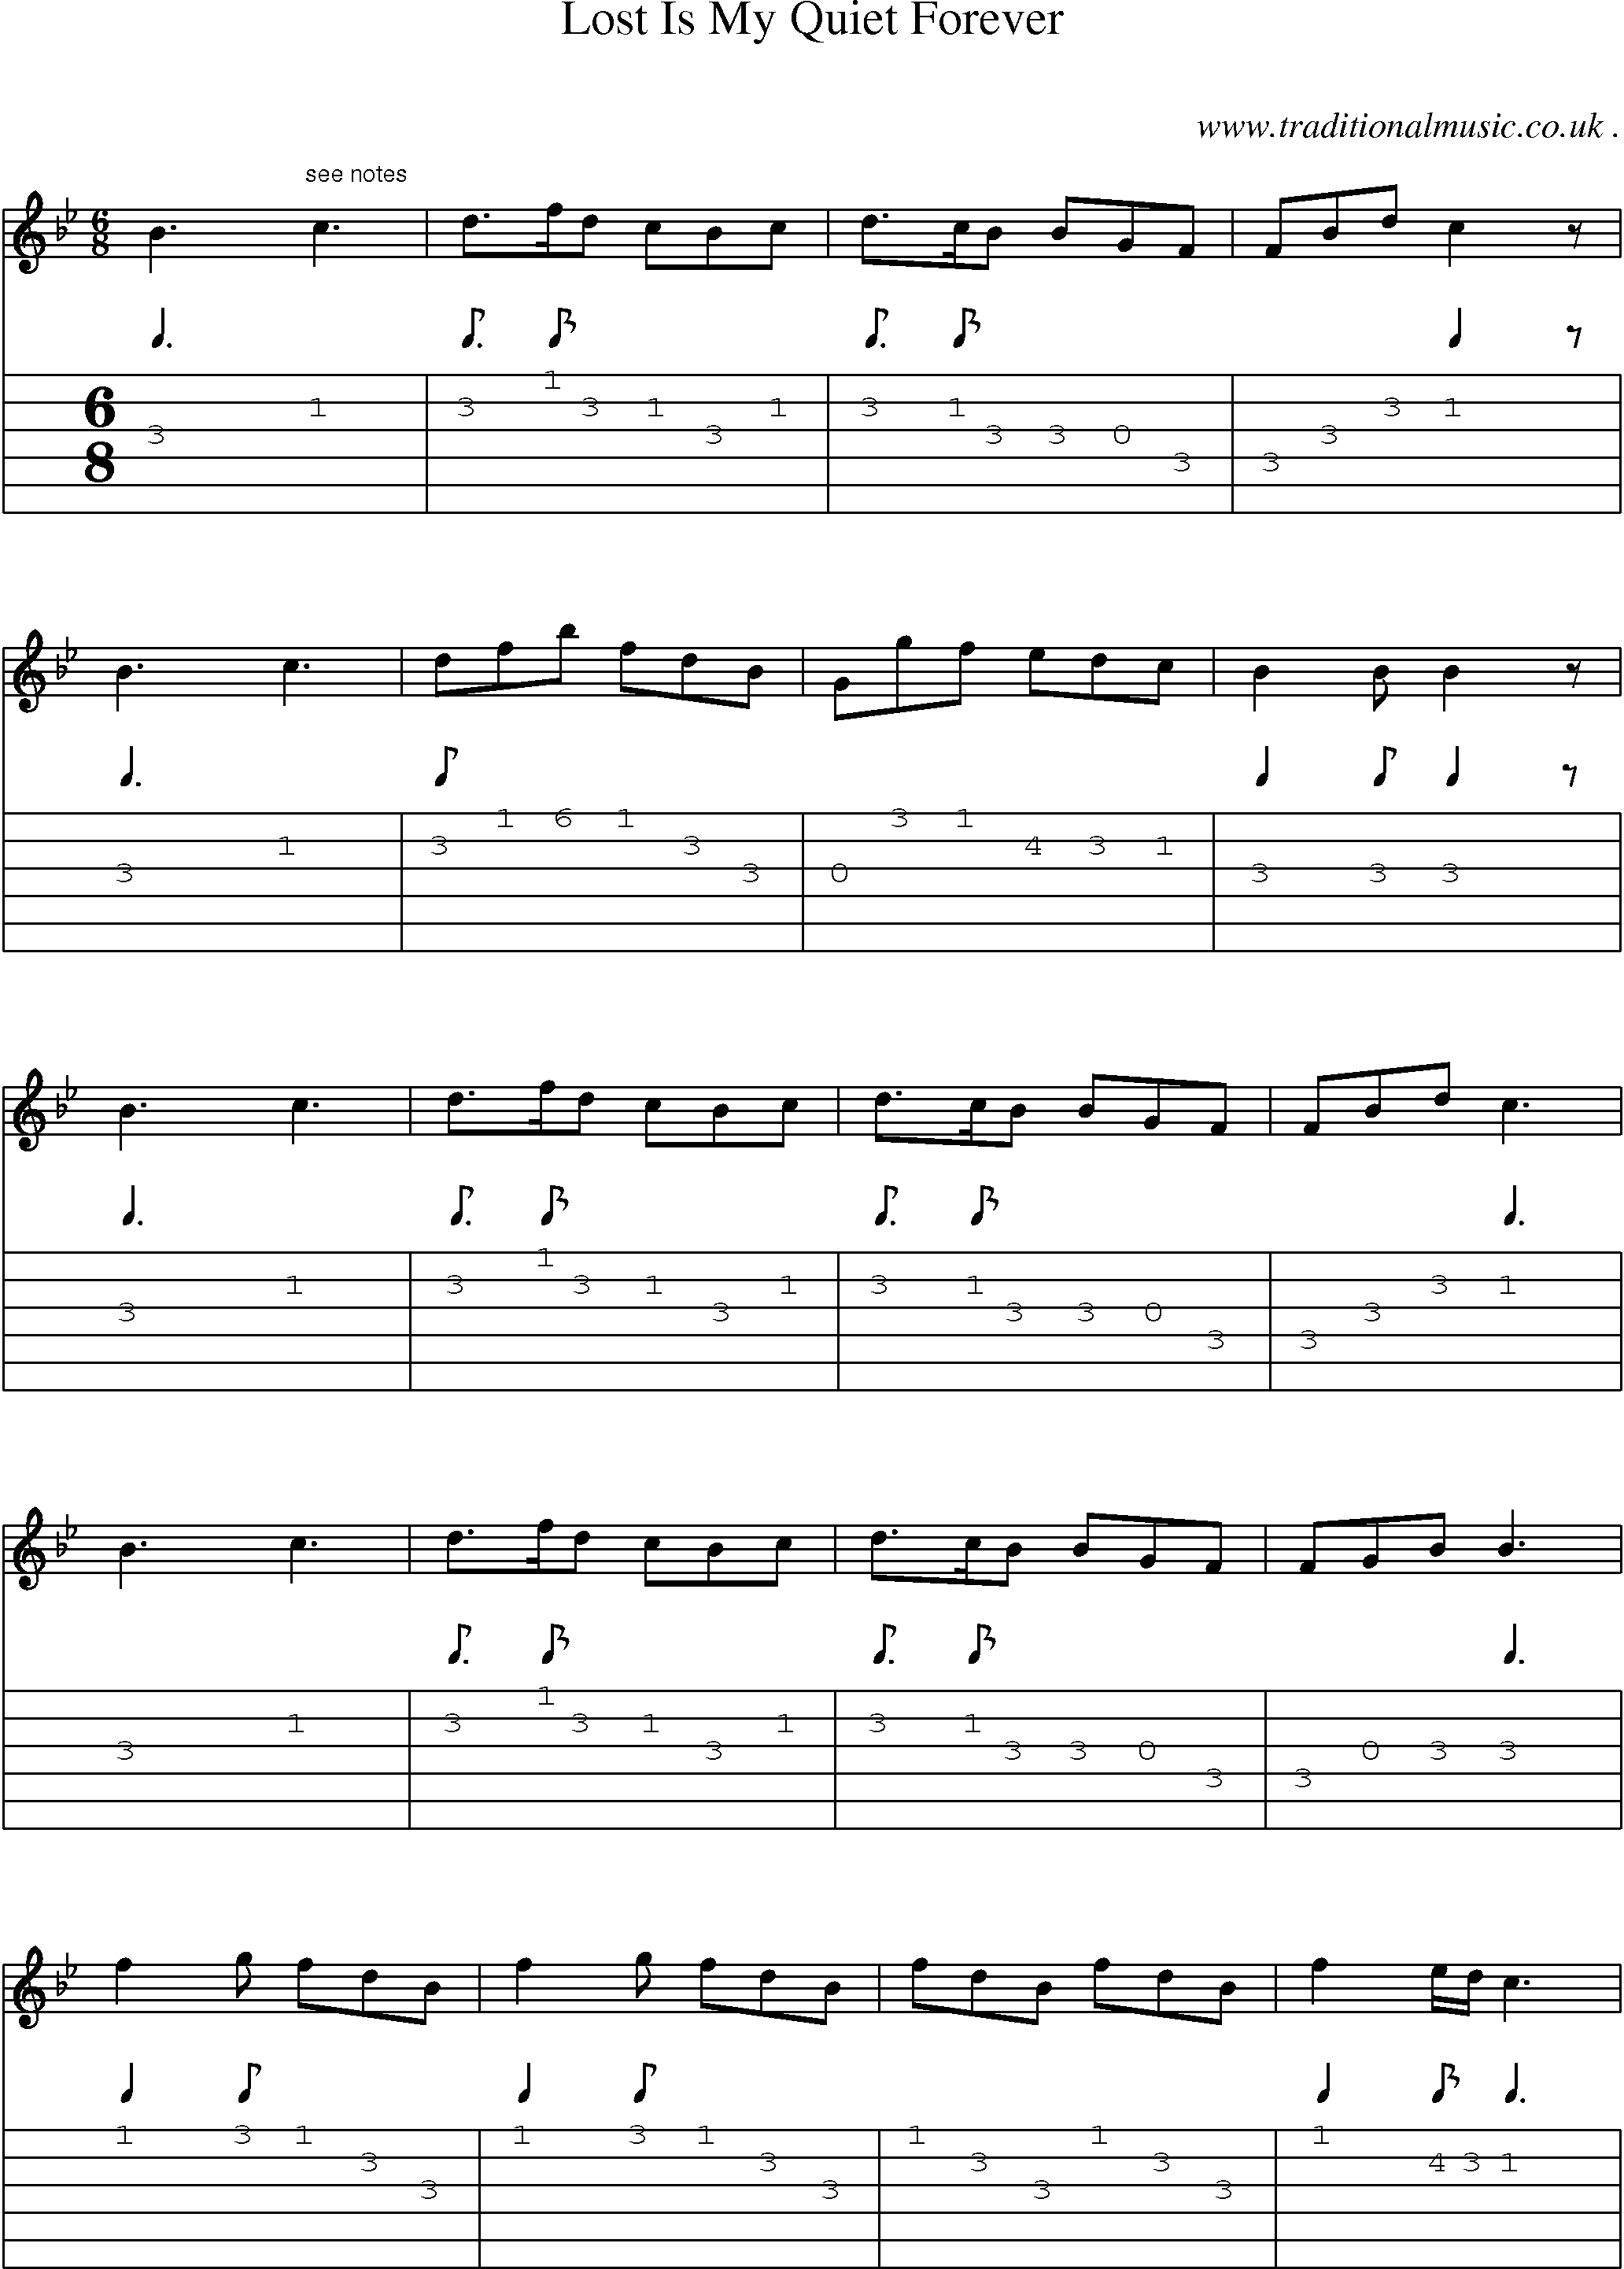 Sheet-Music and Guitar Tabs for Lost Is My Quiet Forever